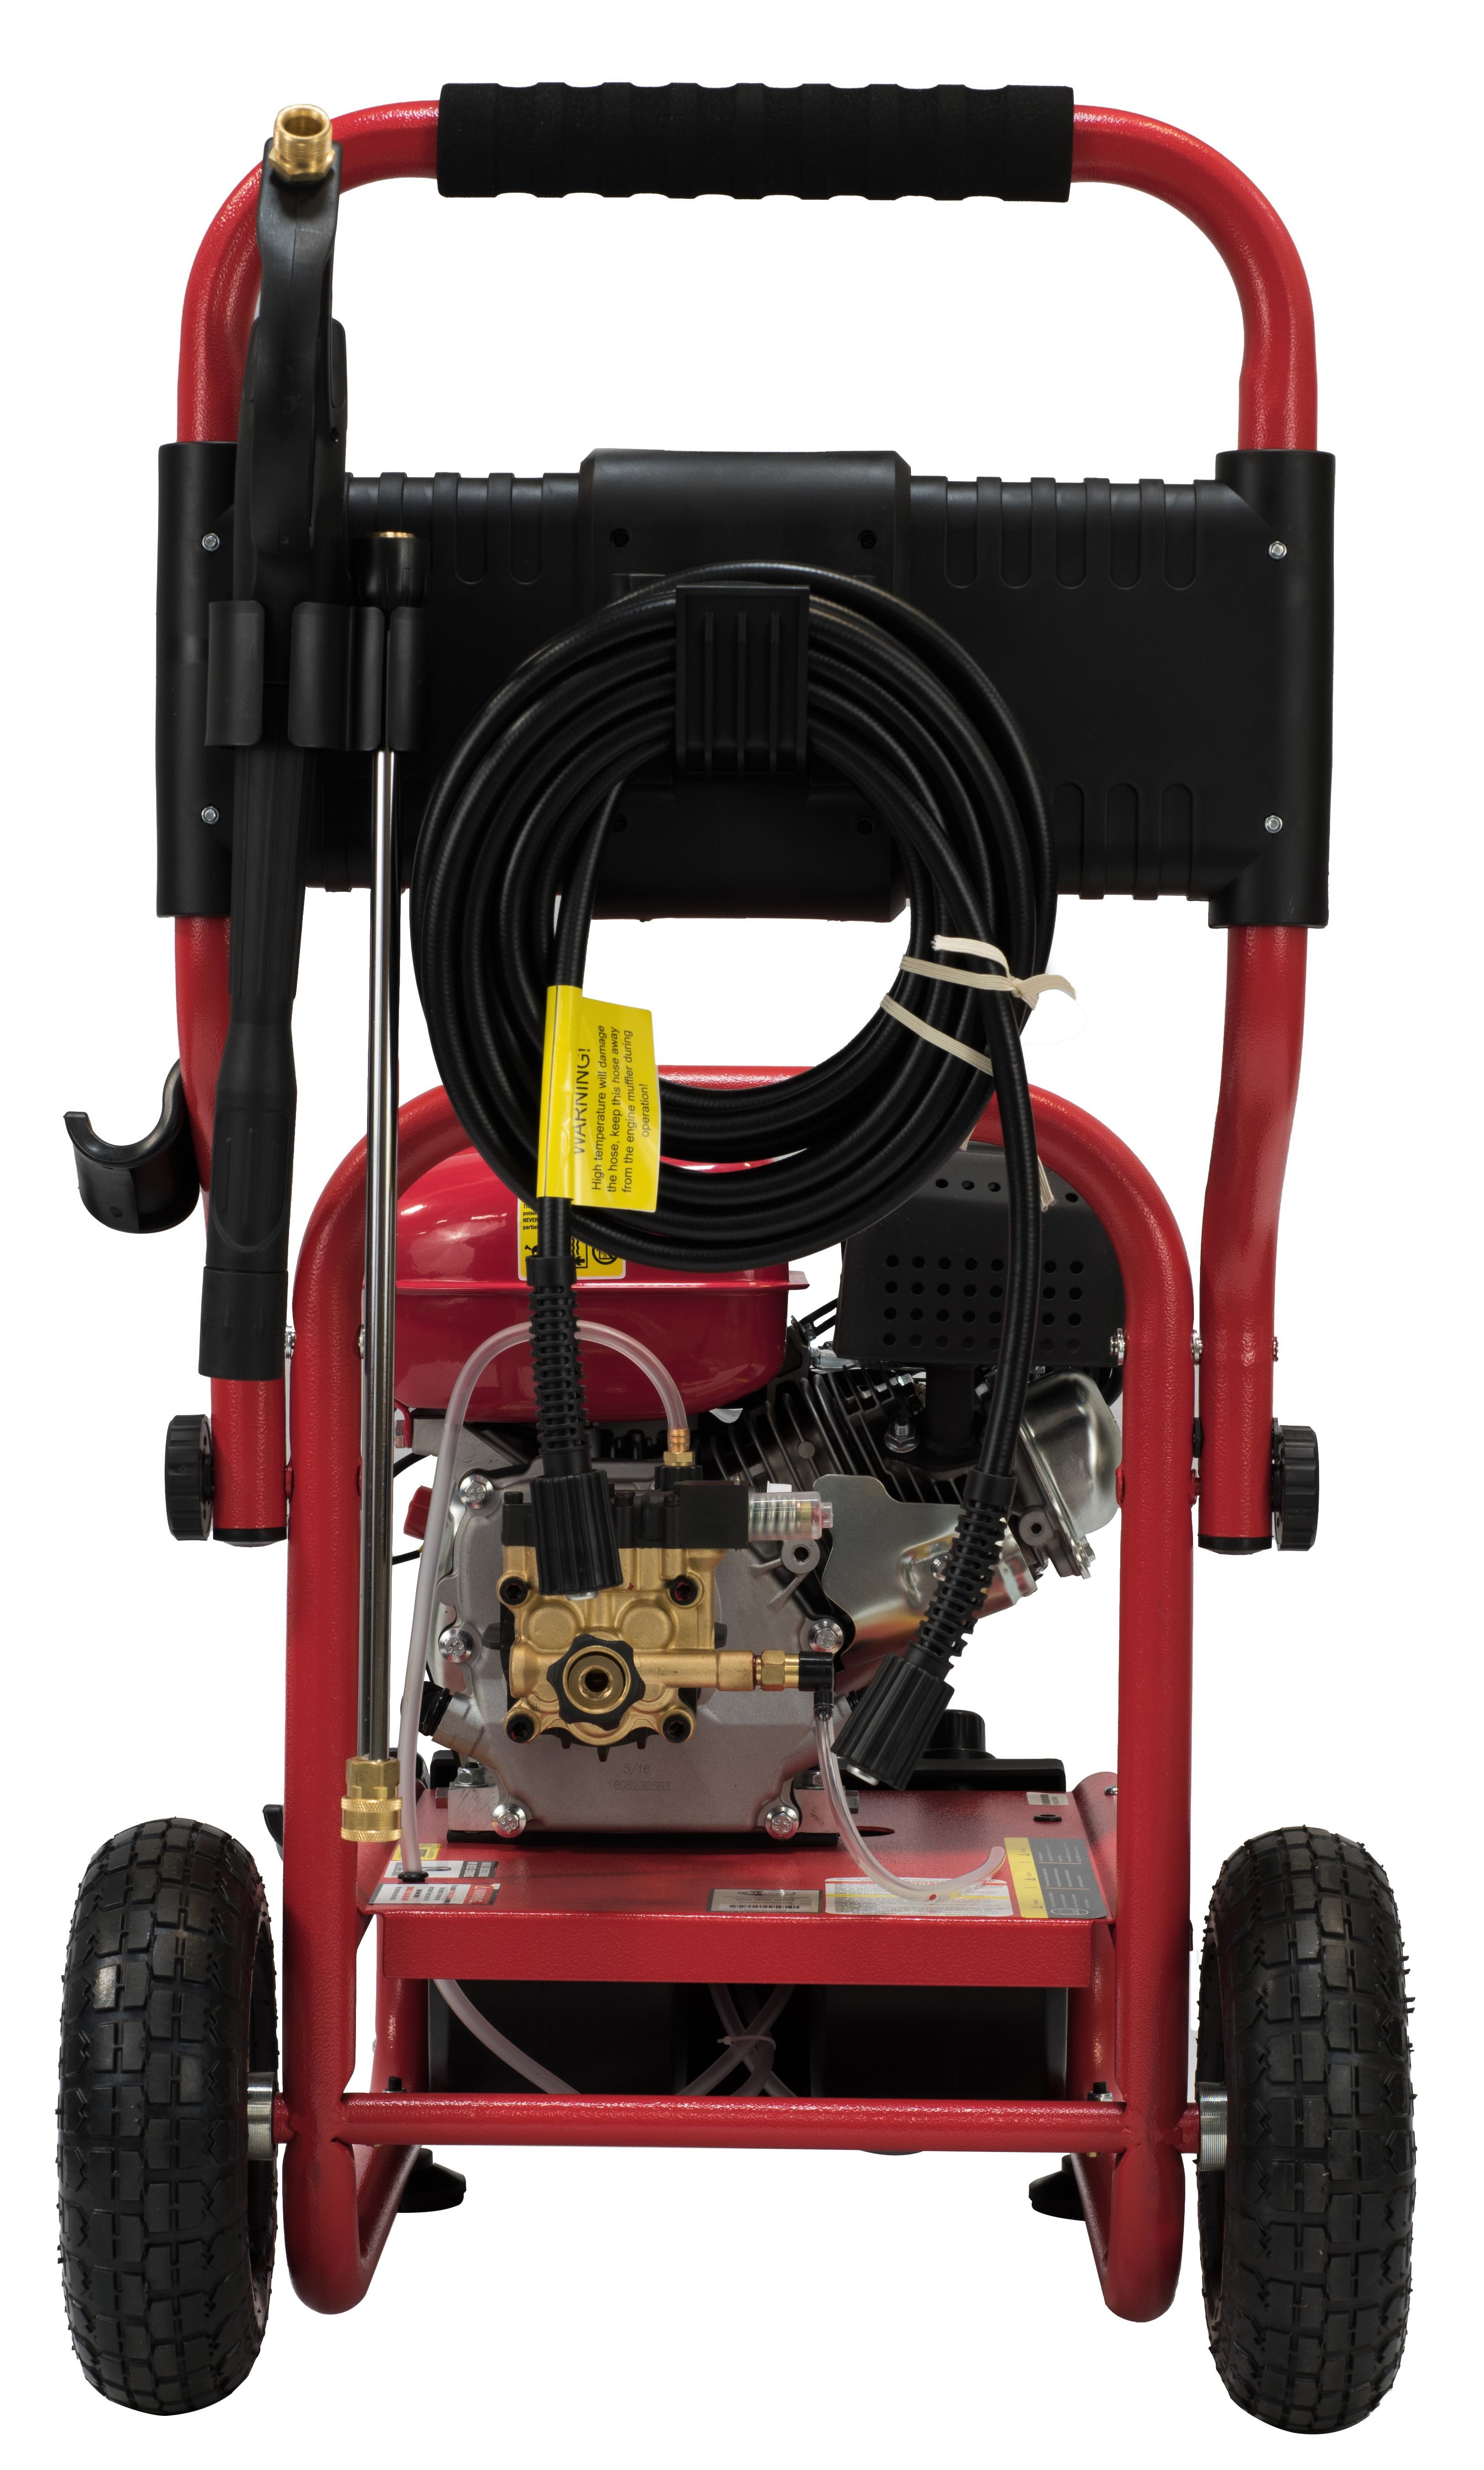 All Power Heavy Duty 3200 PSI, 2.6 GPM Gas Pressure Washer, Power Washer for Outdoor Cleaning, APW5120 - 2